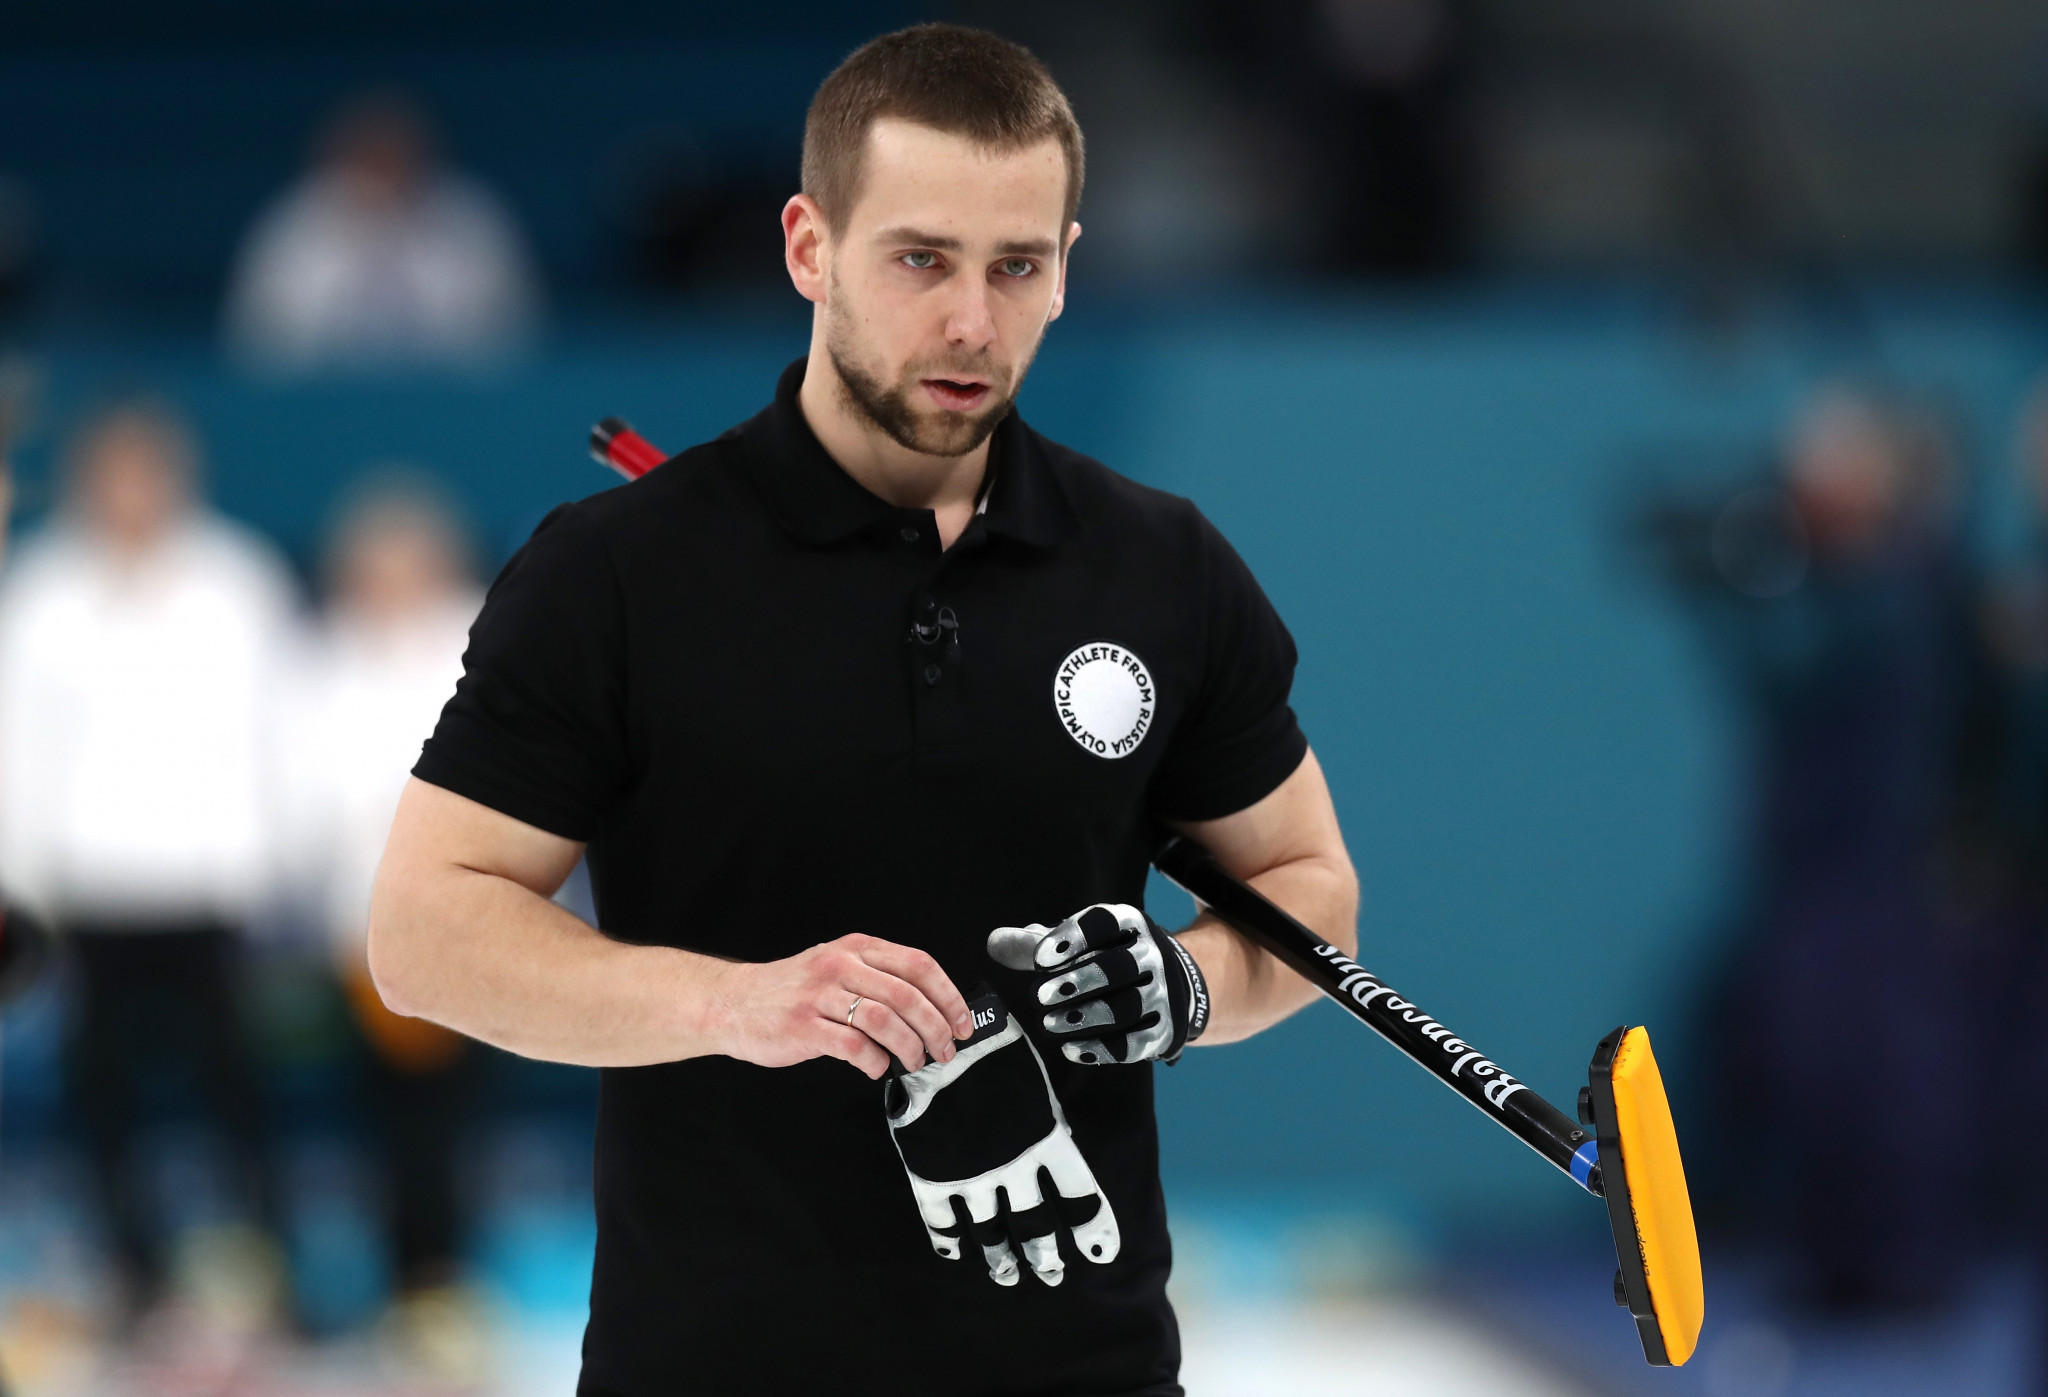 Russian curler Aleksandr Krushelnitckii, banned for doping at Pyeongchang 2018, plans to resume his curling career as his suspension officially ended today ©Getty Images